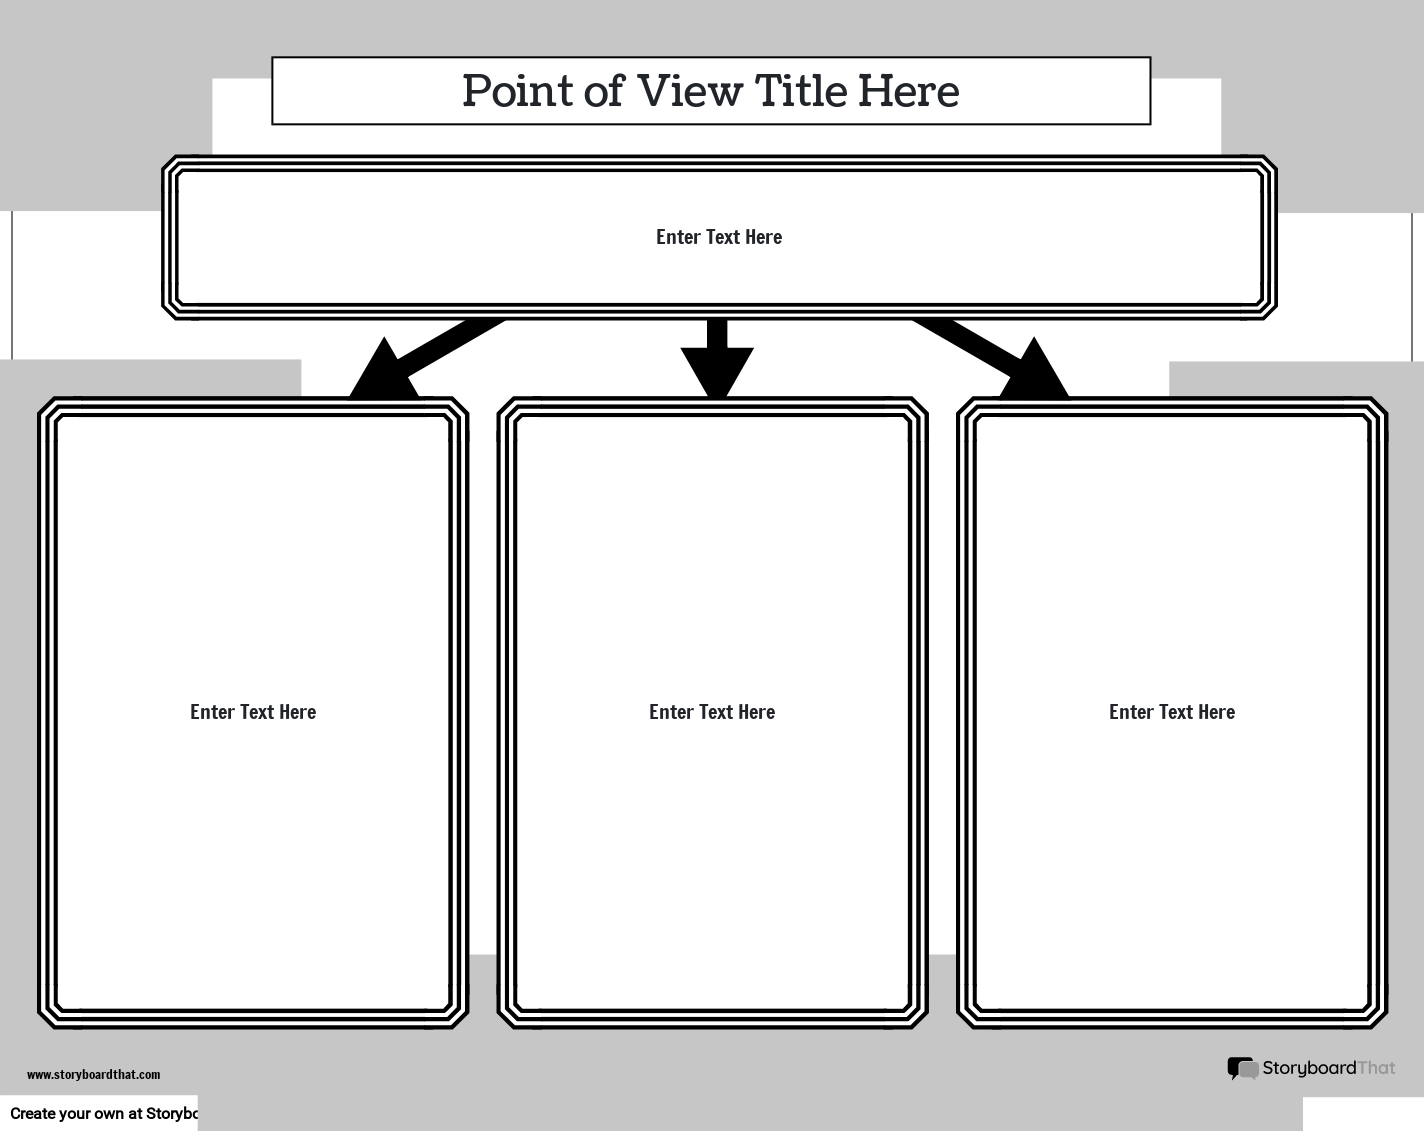 Point of View Template with Multiple Boxes